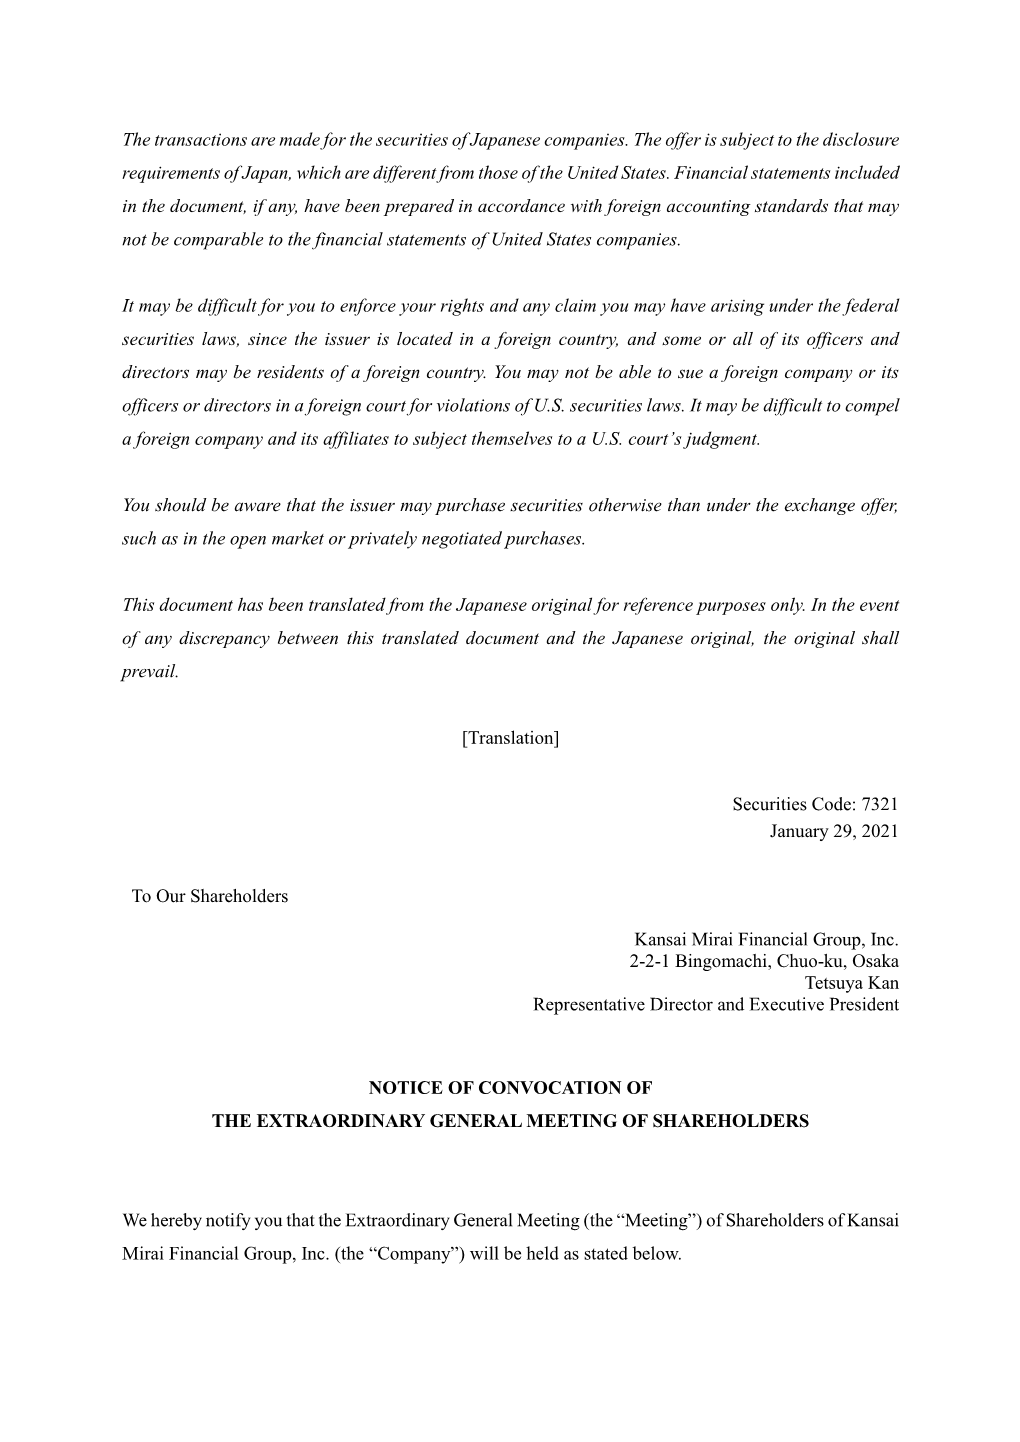 Notice of Convocation of the Extraordinary General Meeting of Shareholders